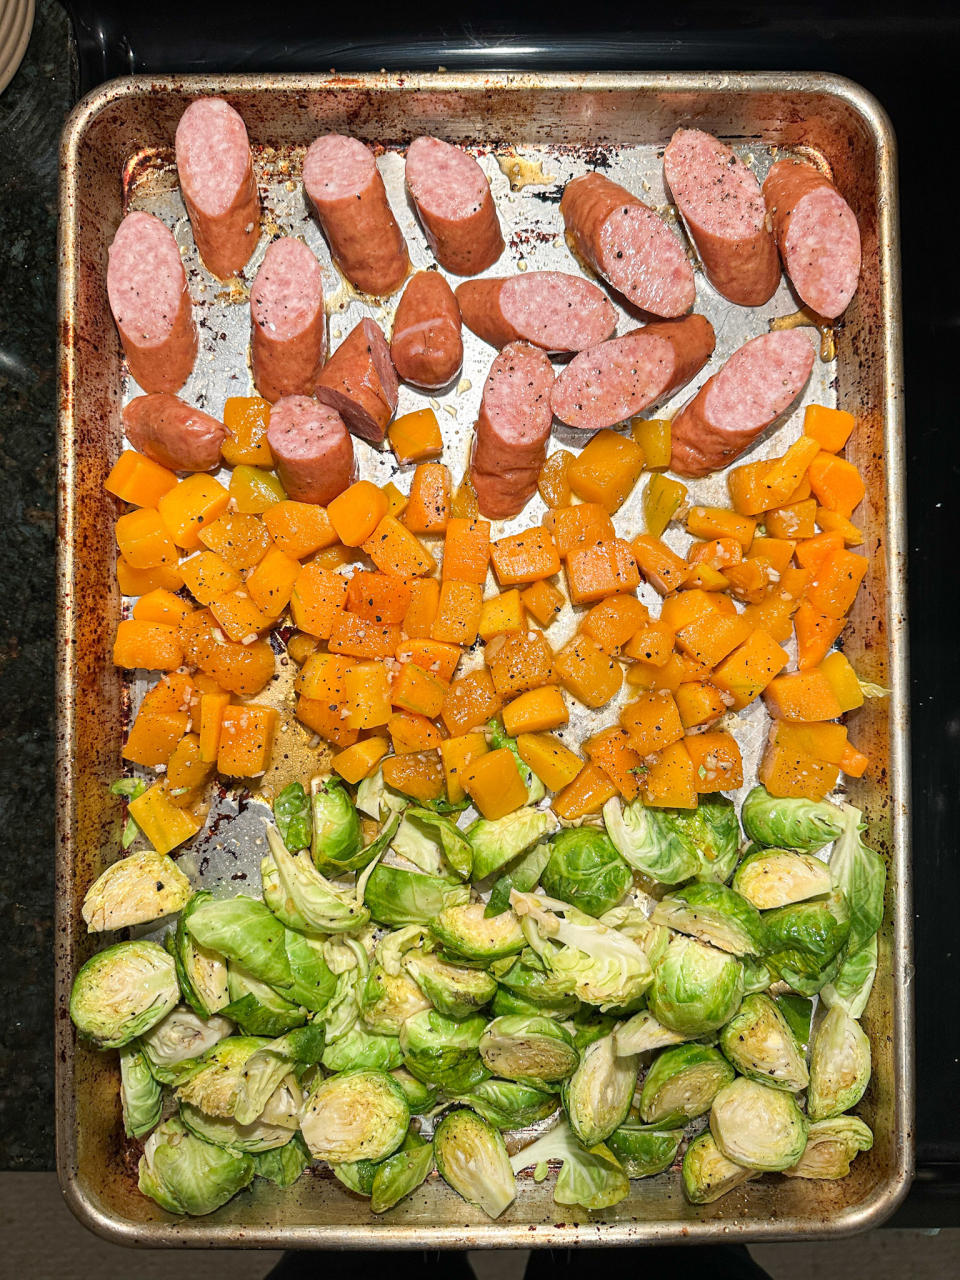 sausage, squash, and brussels sprouts all lined up and seasoned on a sheet pan